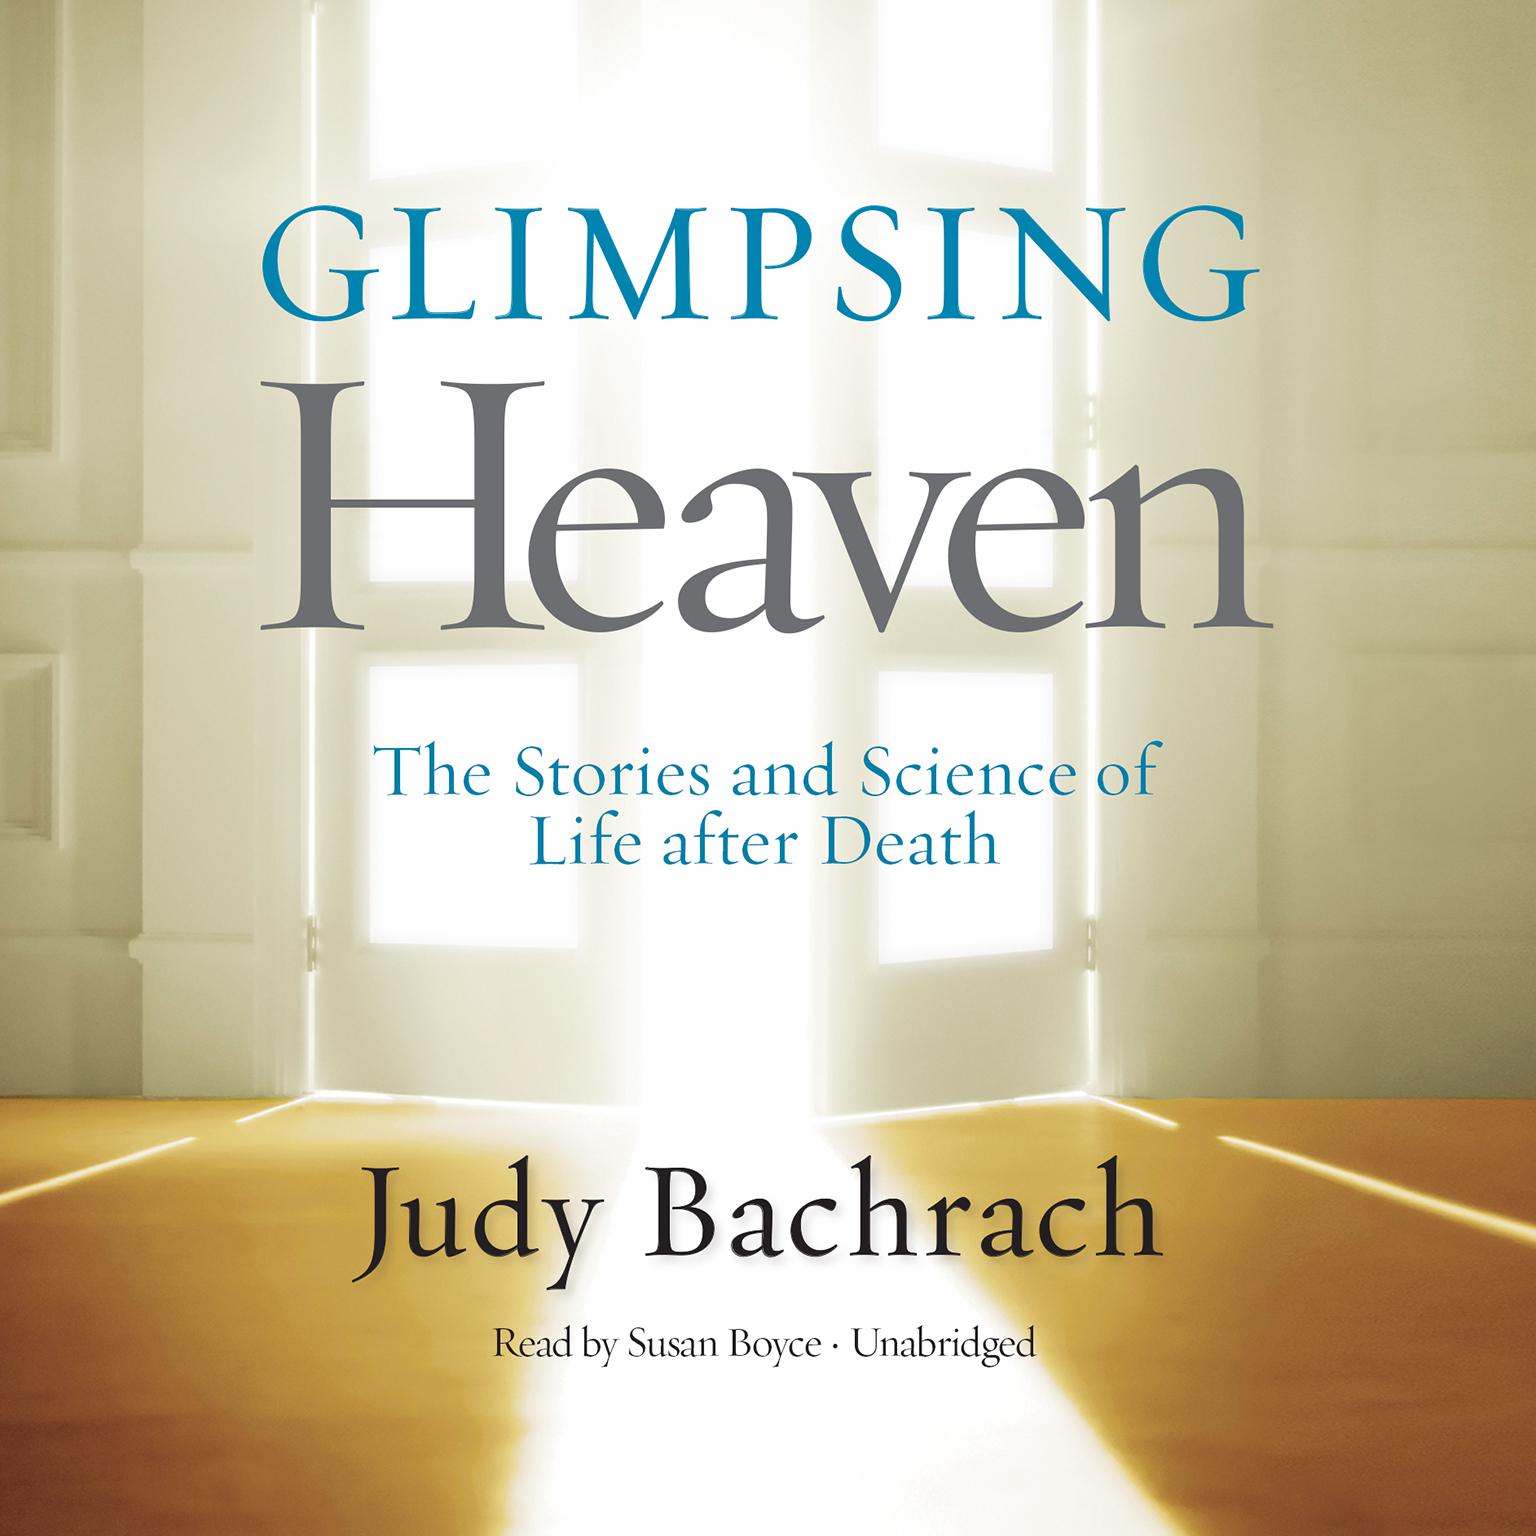 Glimpsing Heaven: The Stories and Science of Life after Death Audiobook, by Judy Bachrach